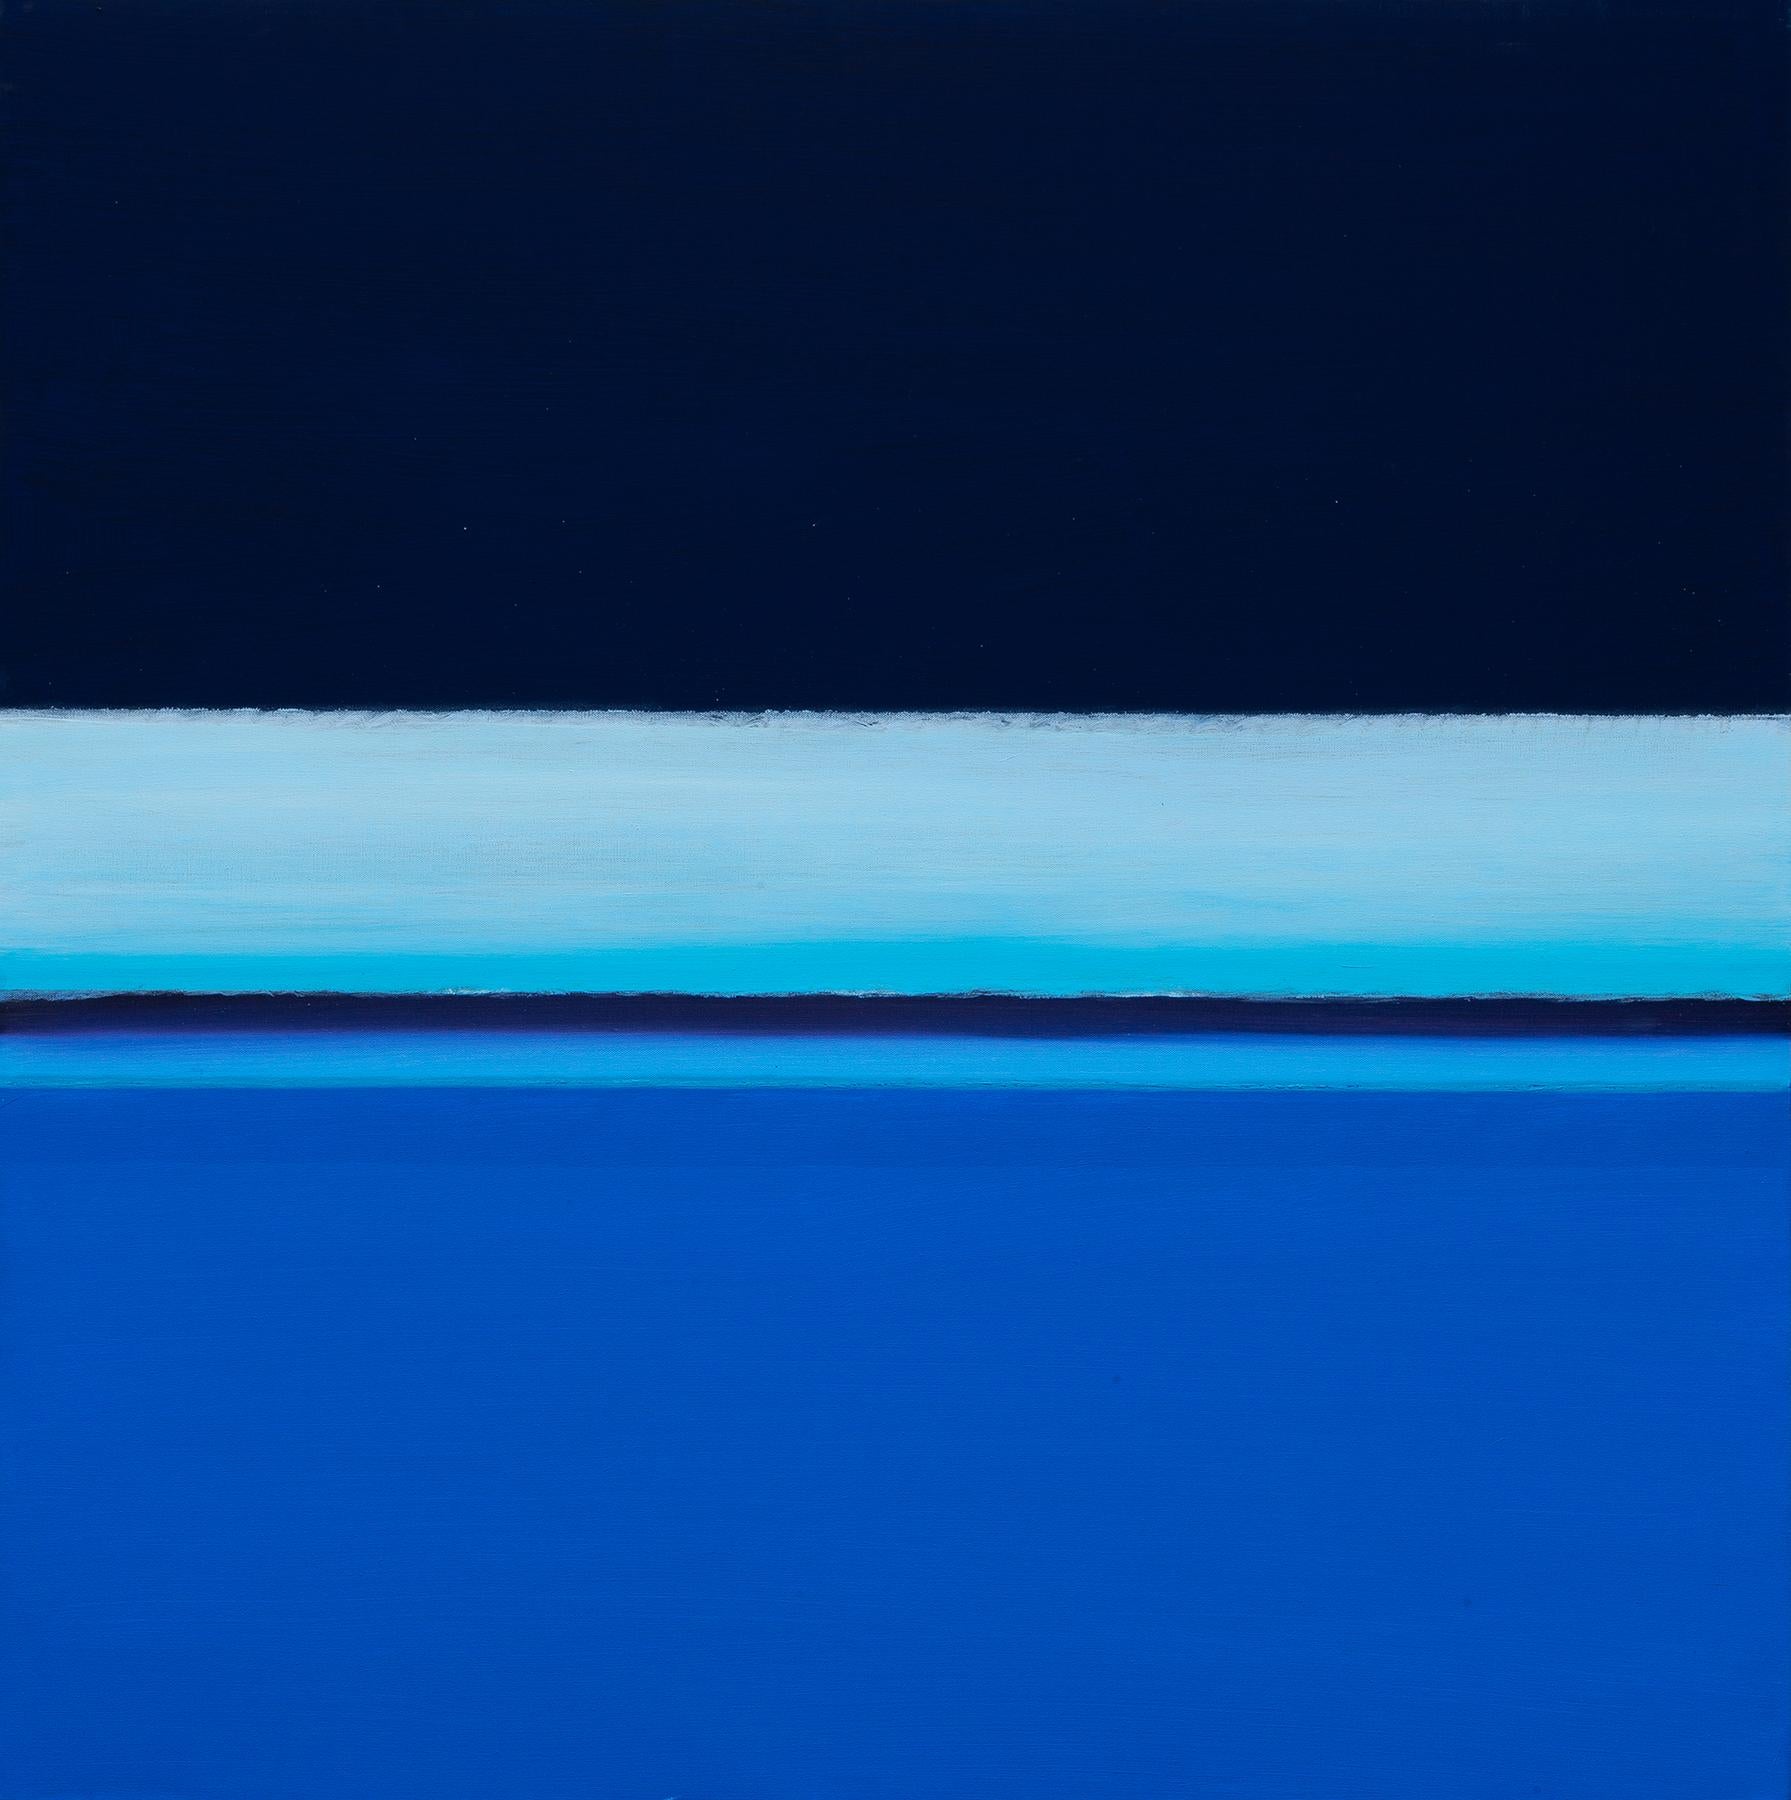 Joseph McAleer Abstract Painting - River of Dreams II: abstract landscape painting with blue water and night sky